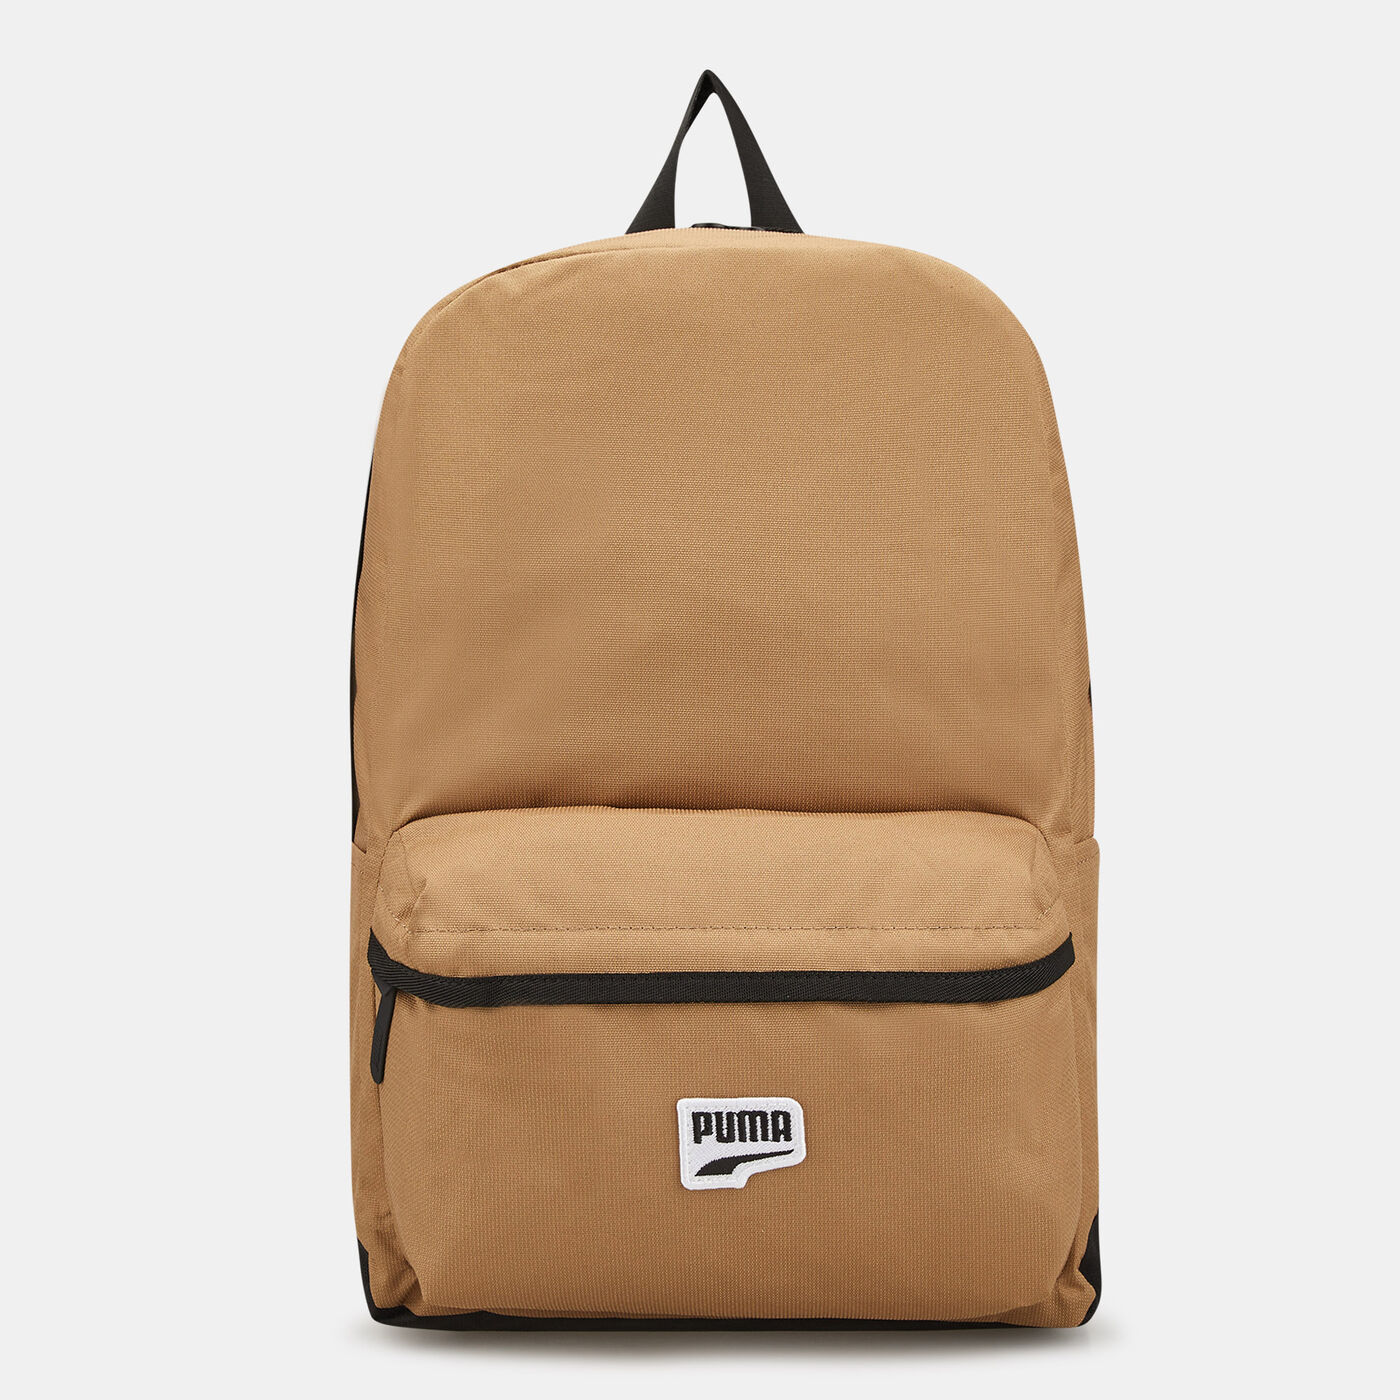 Downtown Backpack